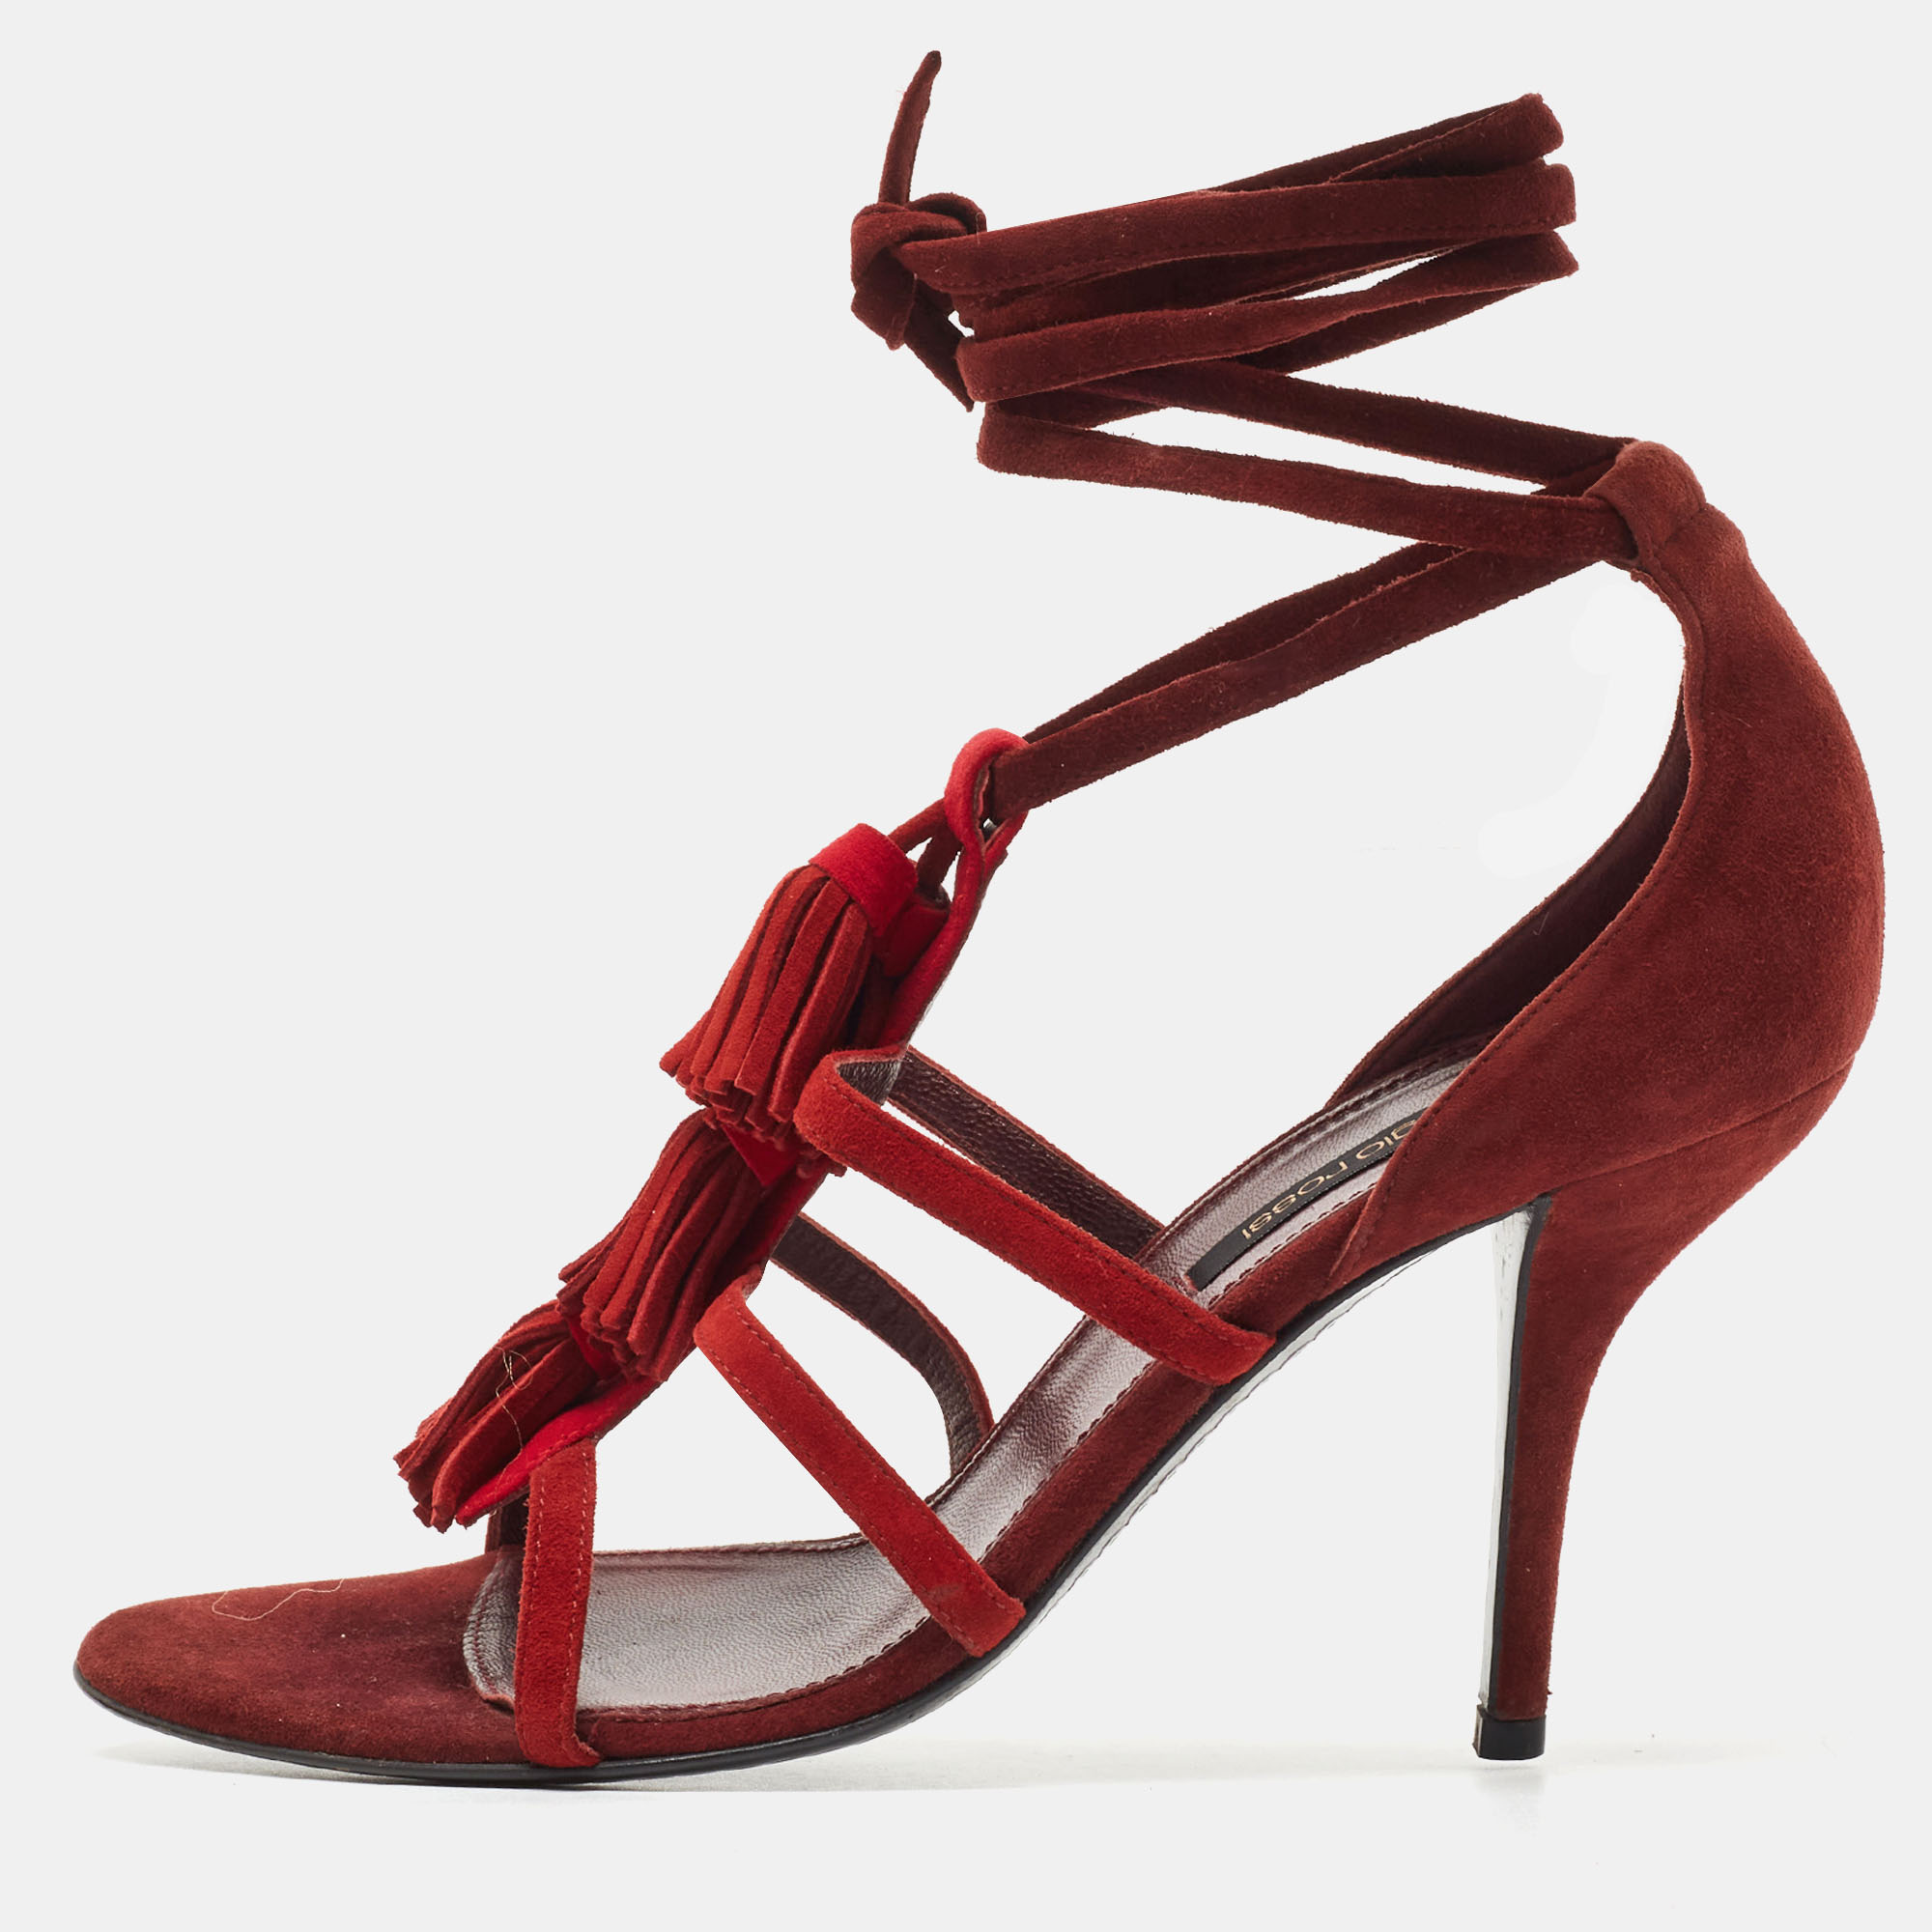 Look glamorous no matter what you wear with these beautiful sandals from Sergio Rossi as you step out in style. Crafted in Italy they are crafted from quality suede and comes in a lovely two tone. These strappy sandals are styled with tassels on the upper and 10.5cm heels.